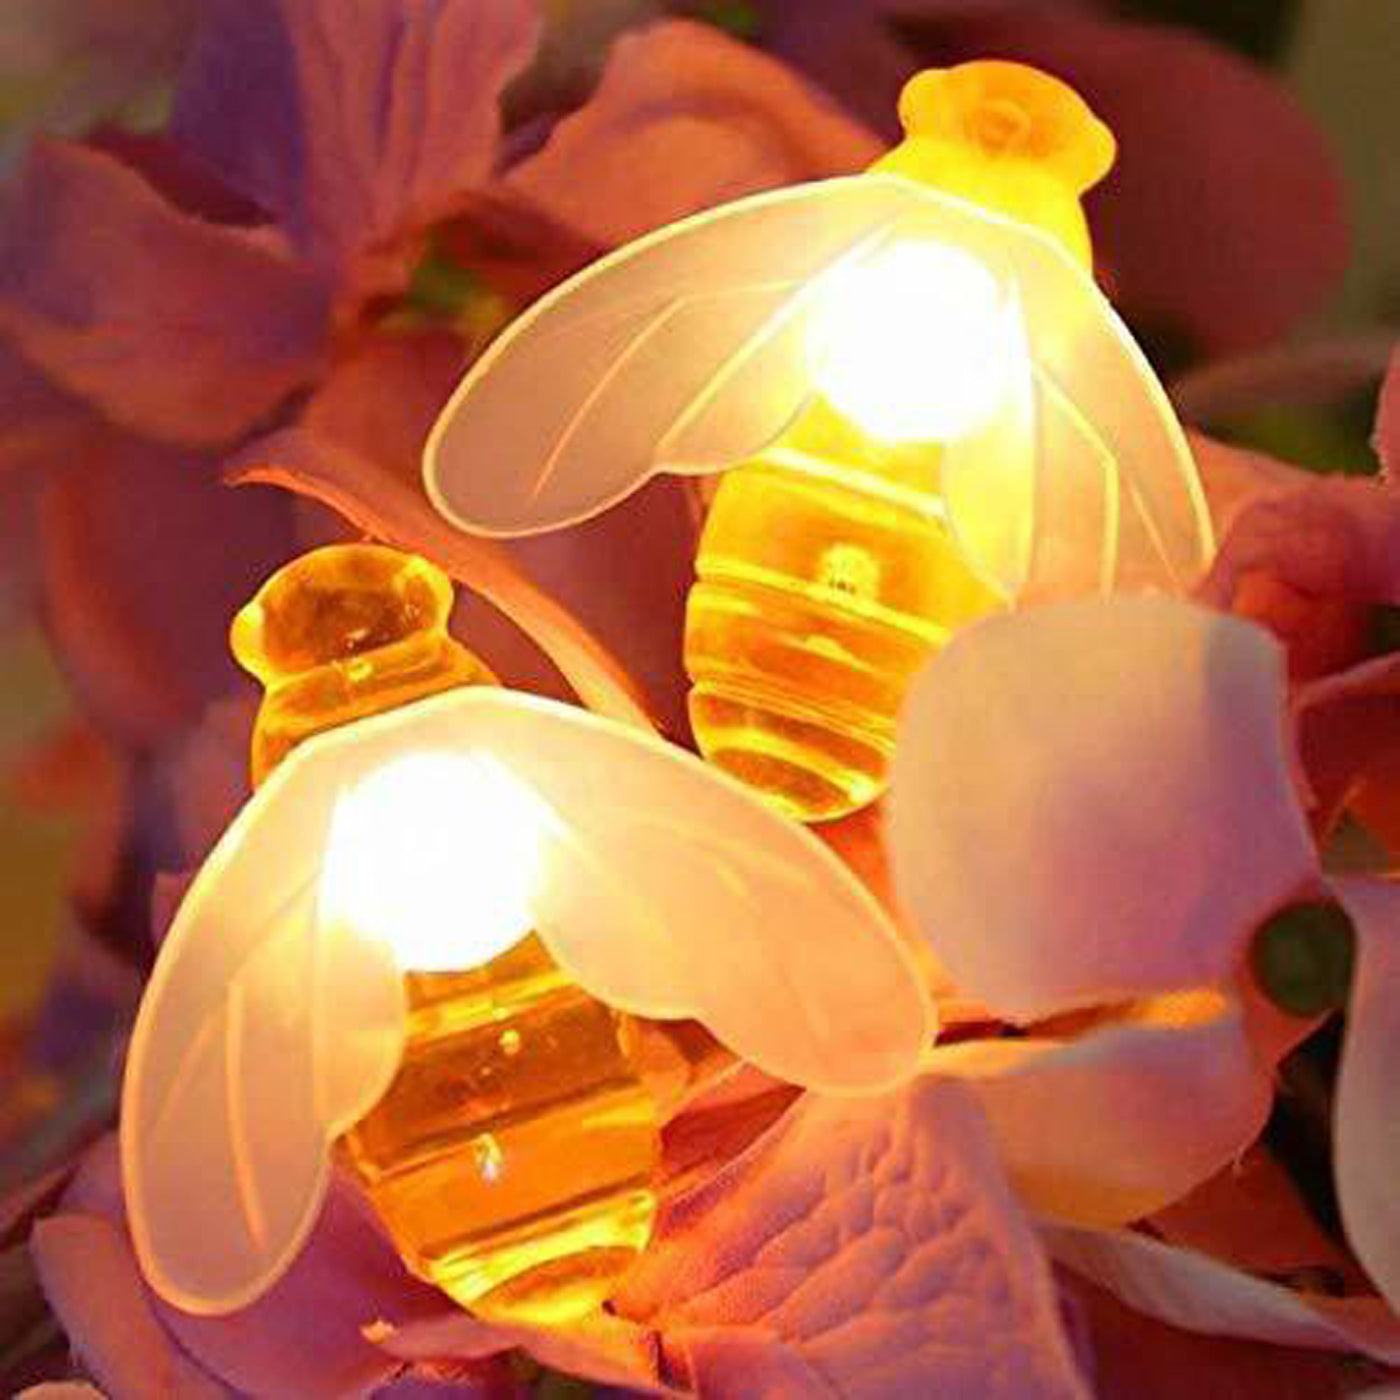 DecorTwist Fancy LED String Light for Home and Office Decor| Indoor & Outdoor Decorative Lights|Christmas |Diwali |Wedding | Christmas | Diwali | Wedding | (4 MTR) (Honey Bee String)